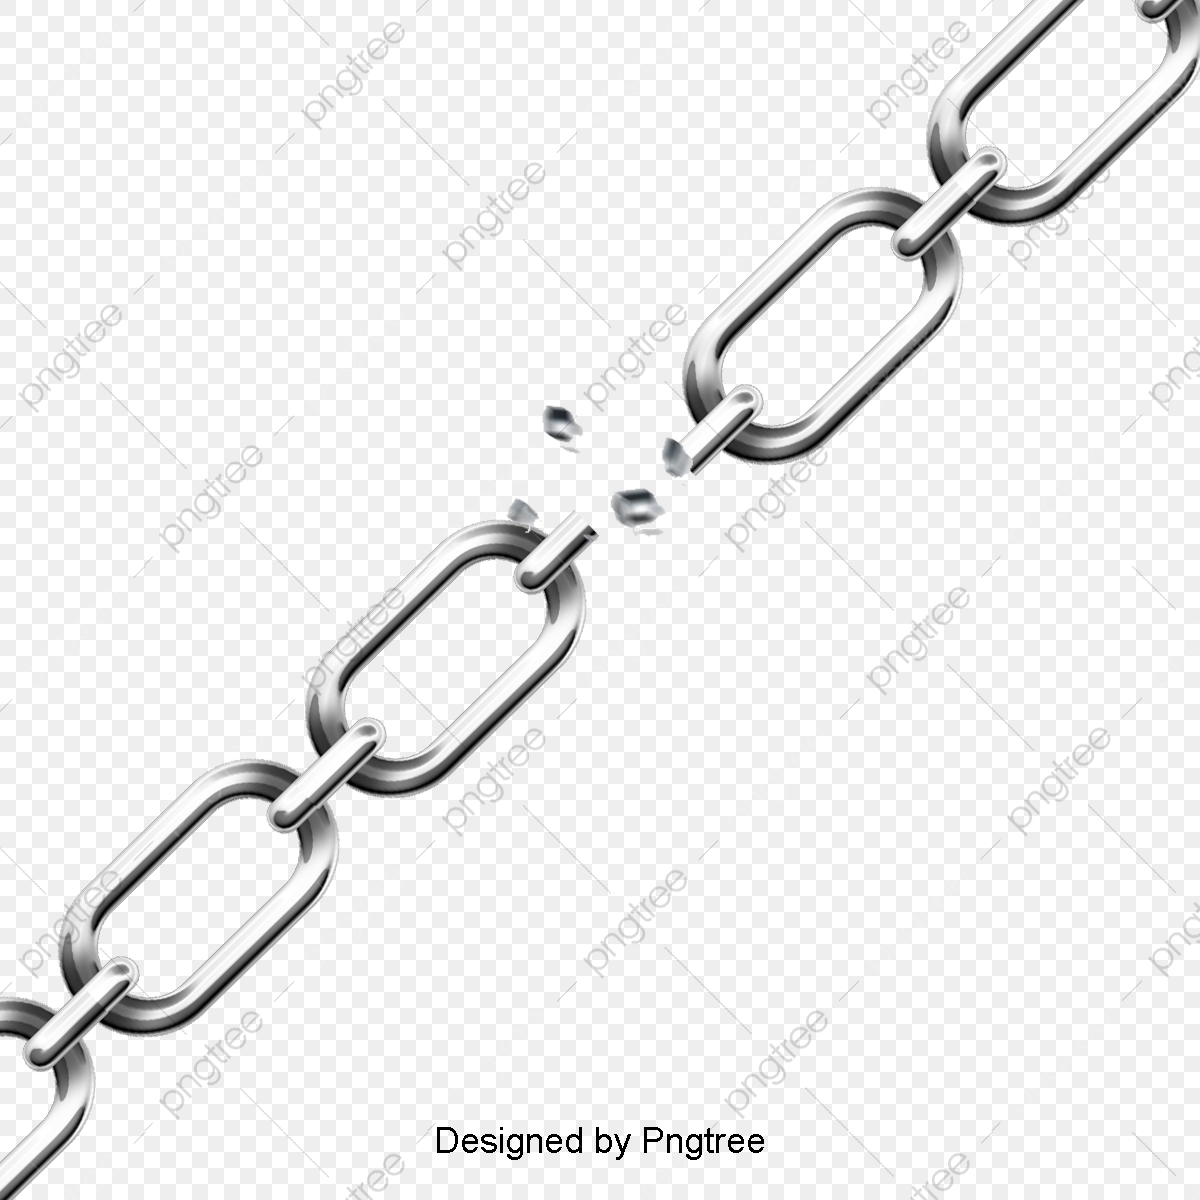 Cut off the png. Chain clipart iron chain